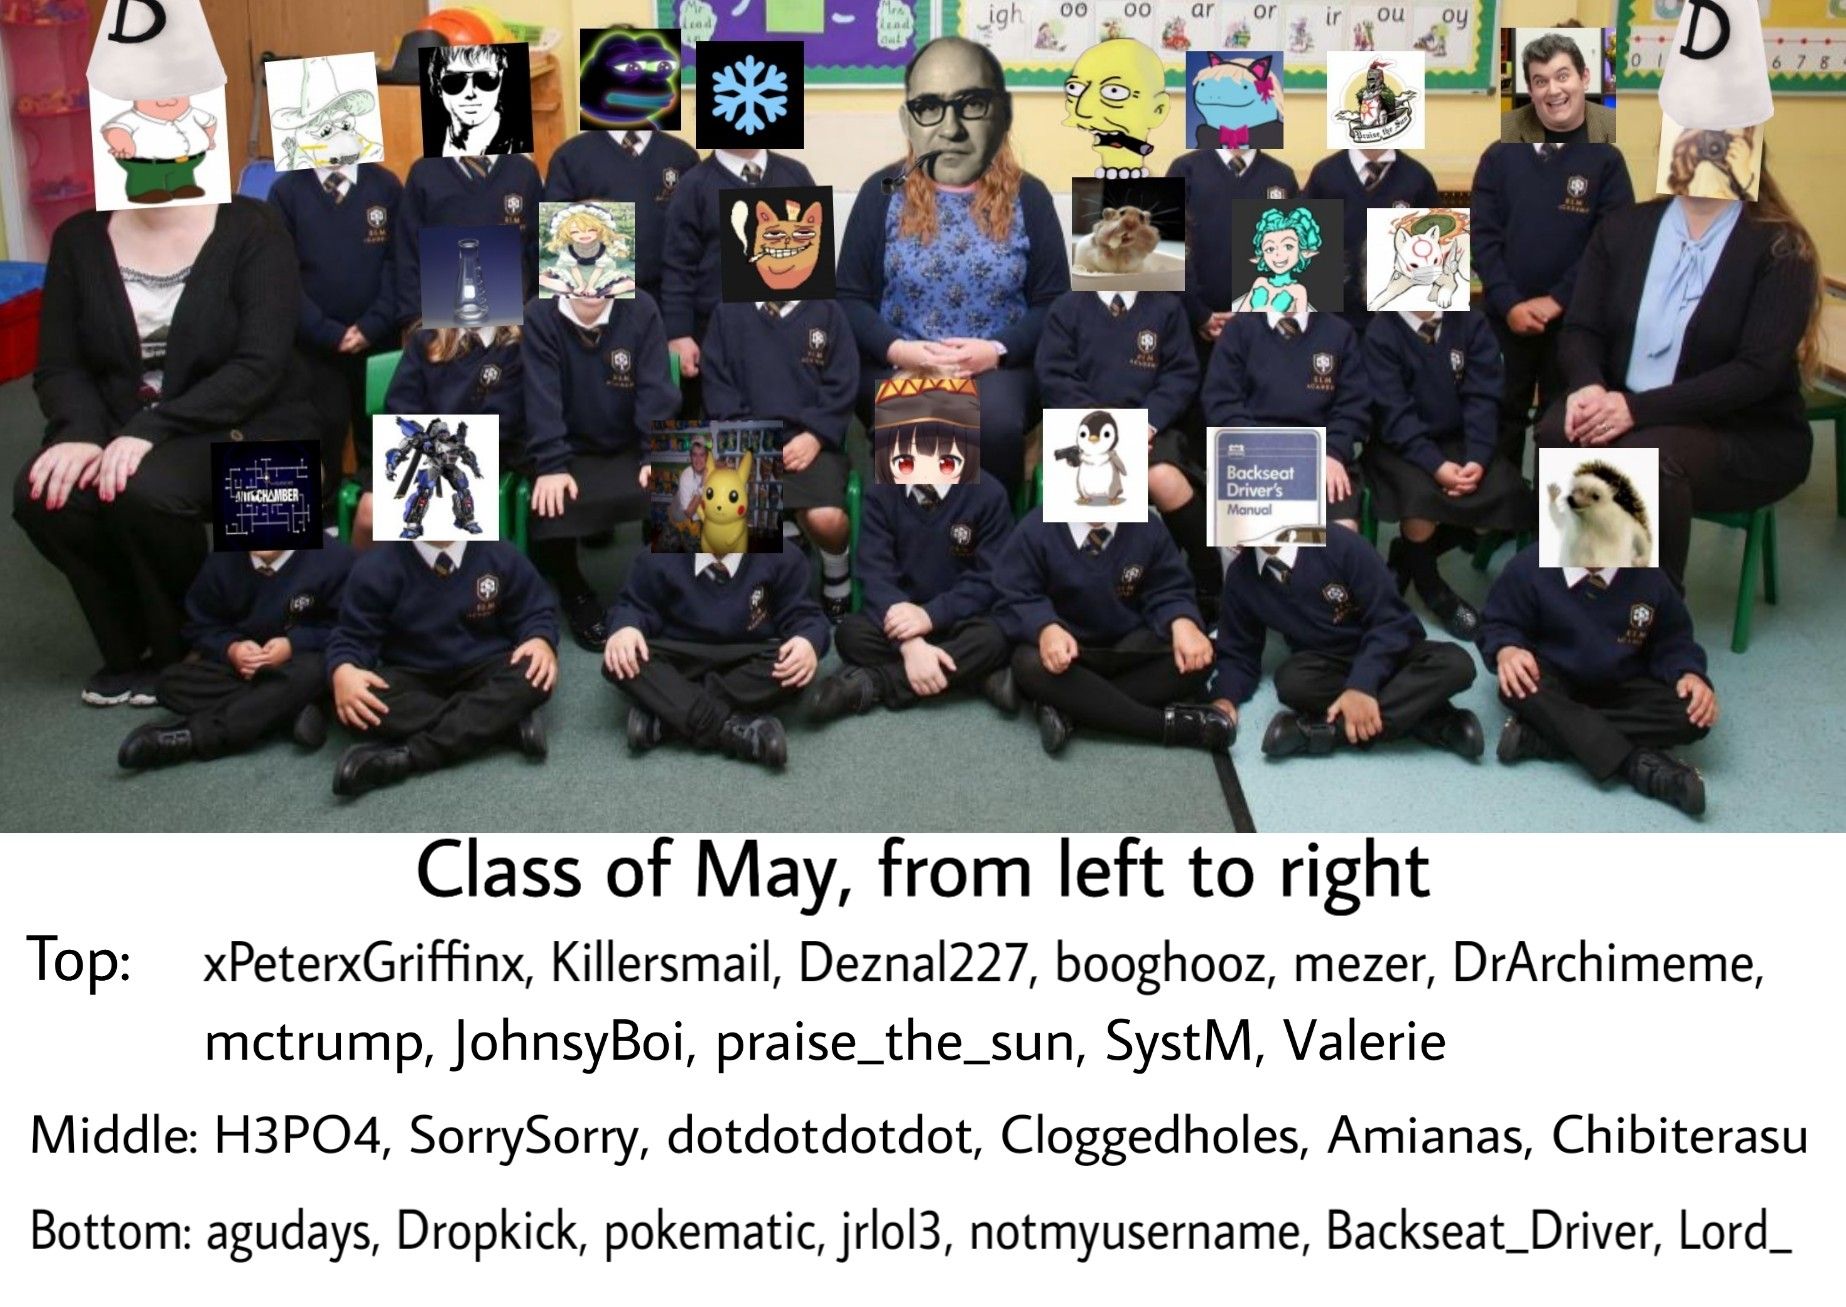 Class of May, Memeology 101. Grades are in the comments, keep quarantine distance and no pushing!